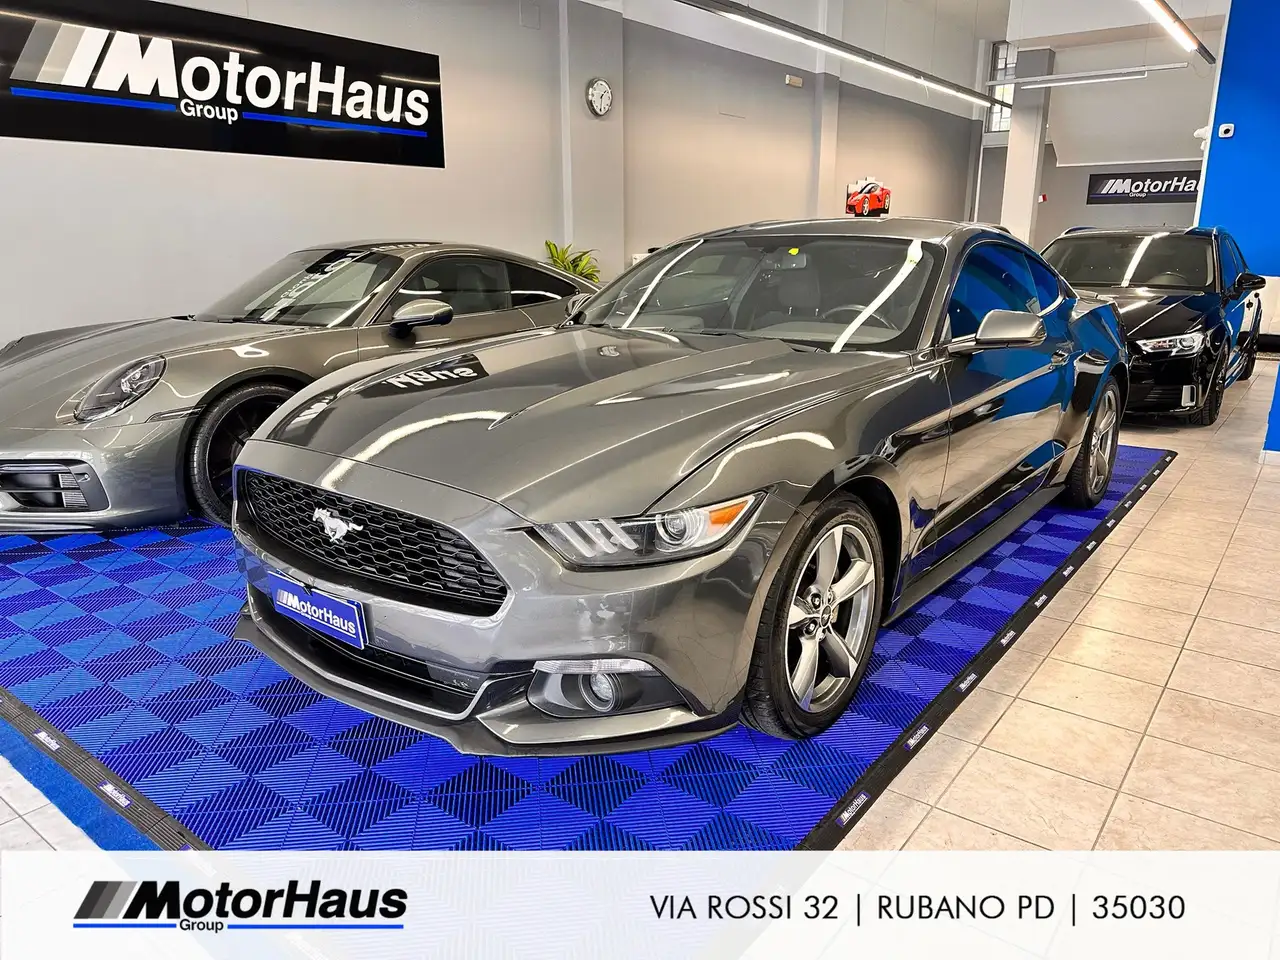 2016 - Ford Mustang Mustang Boîte automatique Coupé